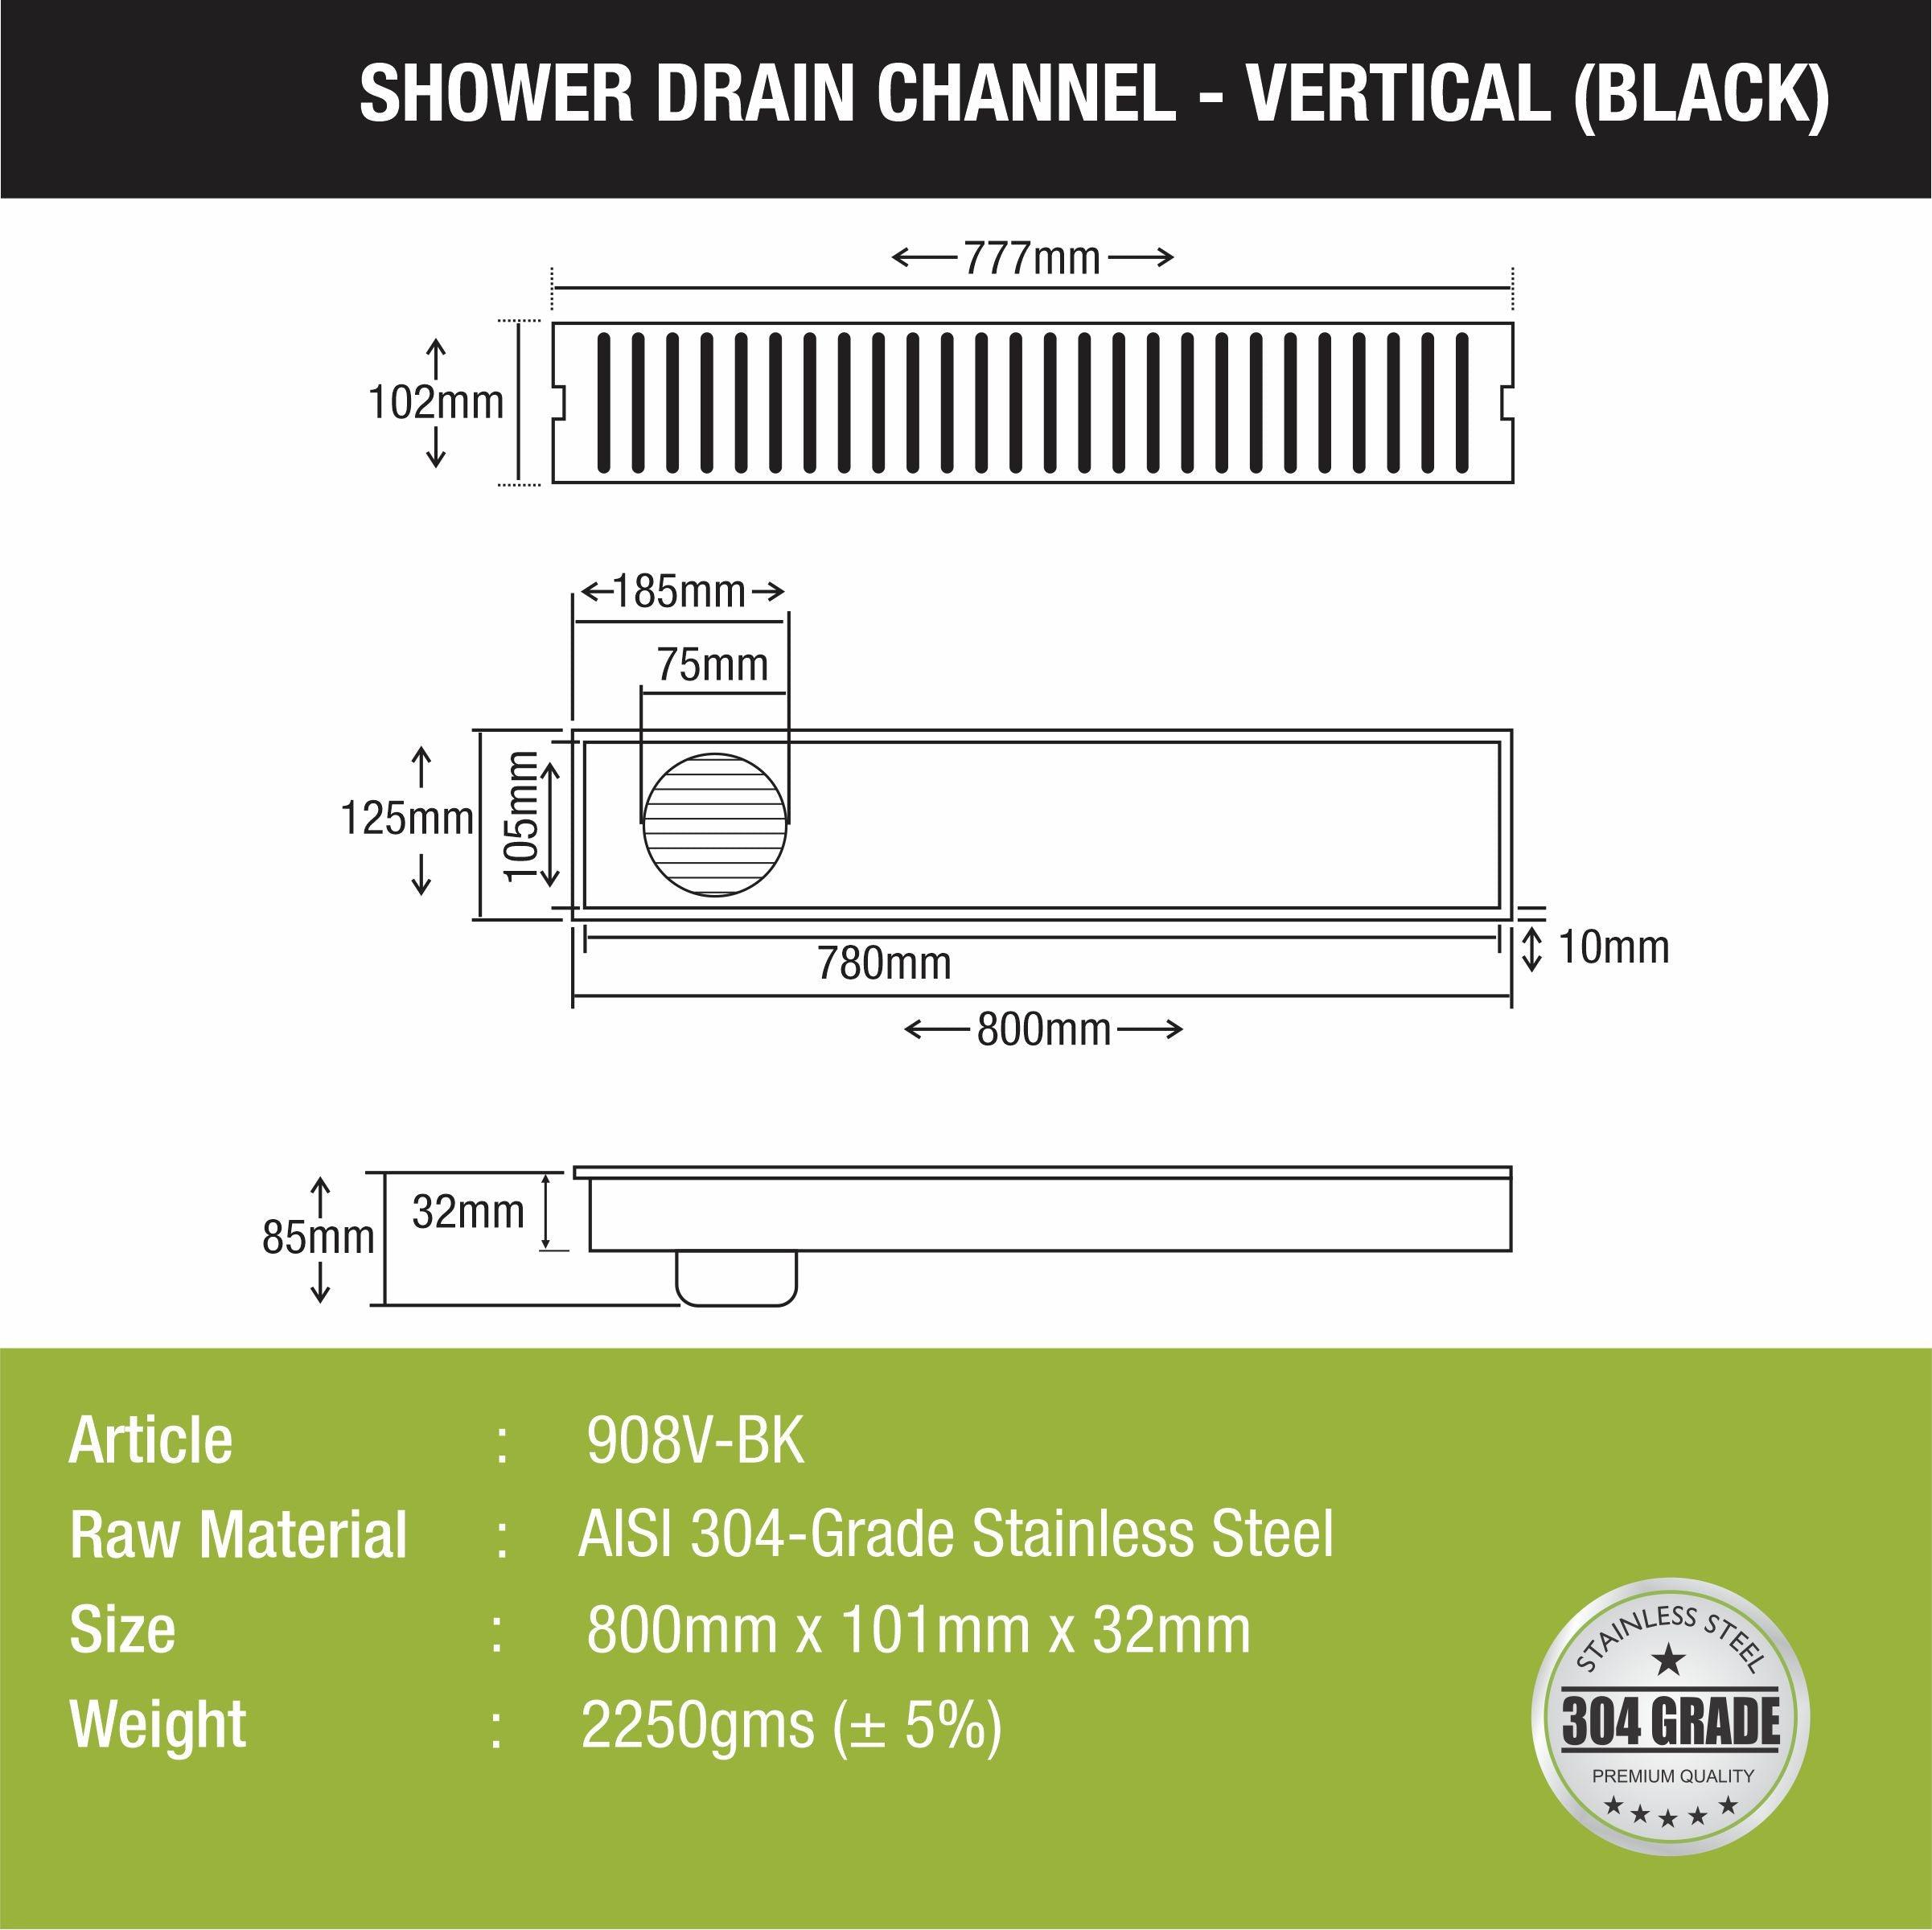 Vertical Shower Drain Channel - Black (32 x 5 Inches size and measurement